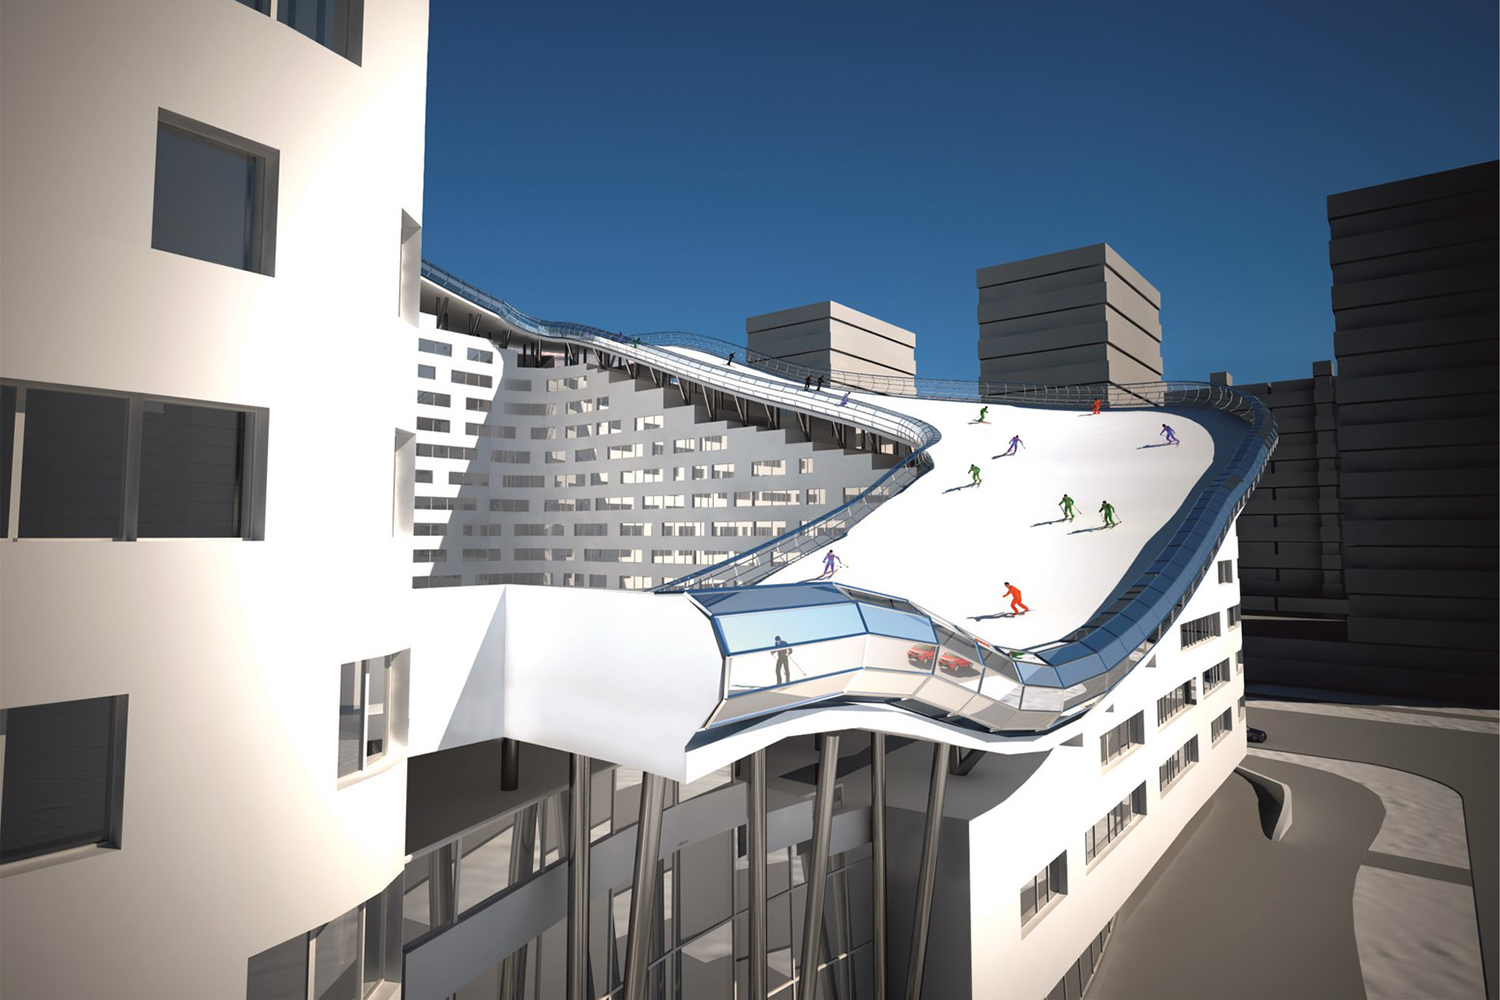 house slalom is an apartment building with a ski slope concept shokhan mataibekov 004